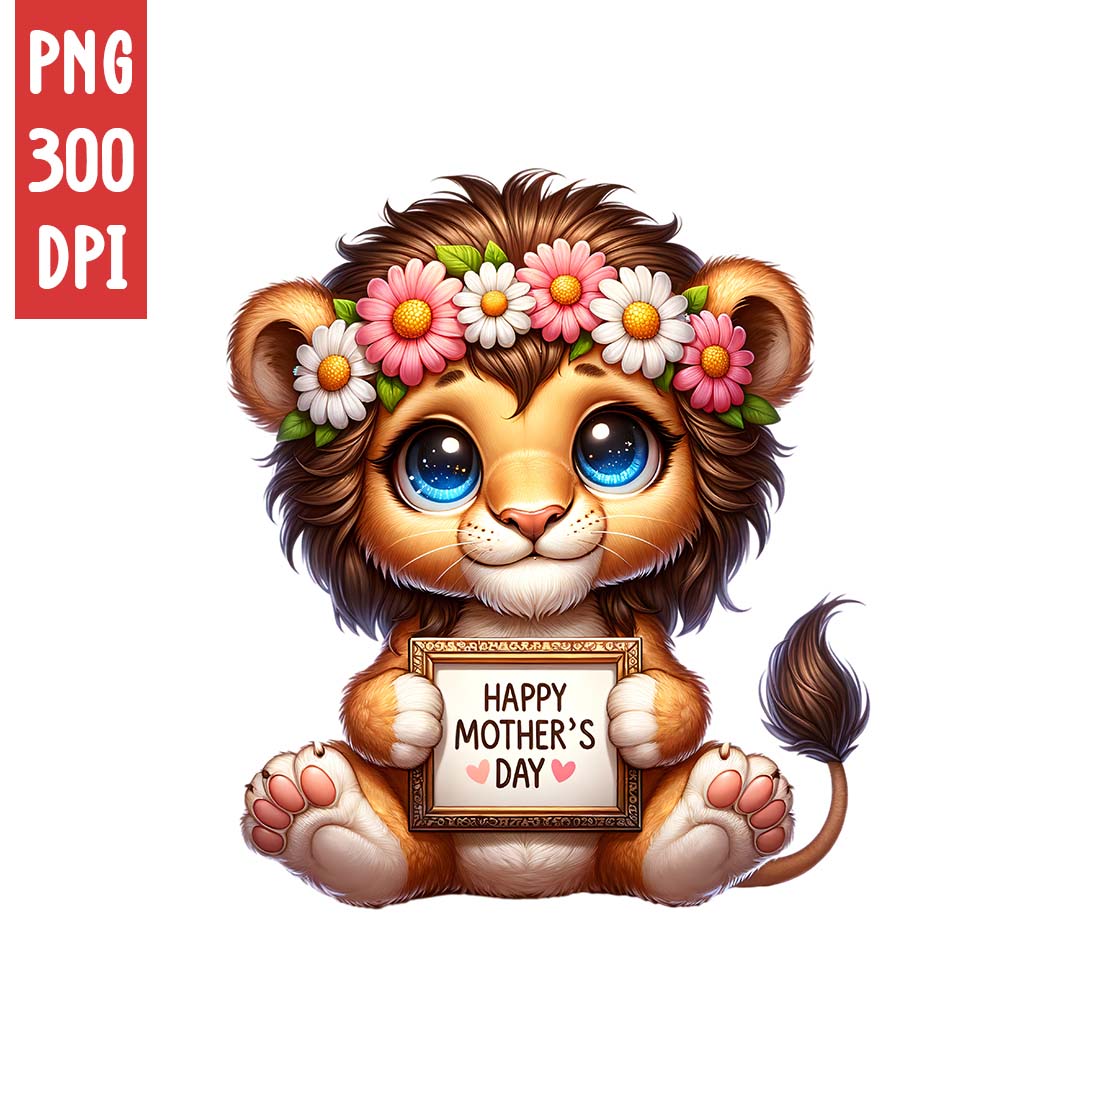 Mother's Day Animal Clipart | Cute Lion with frame clipart | PNG cover image.